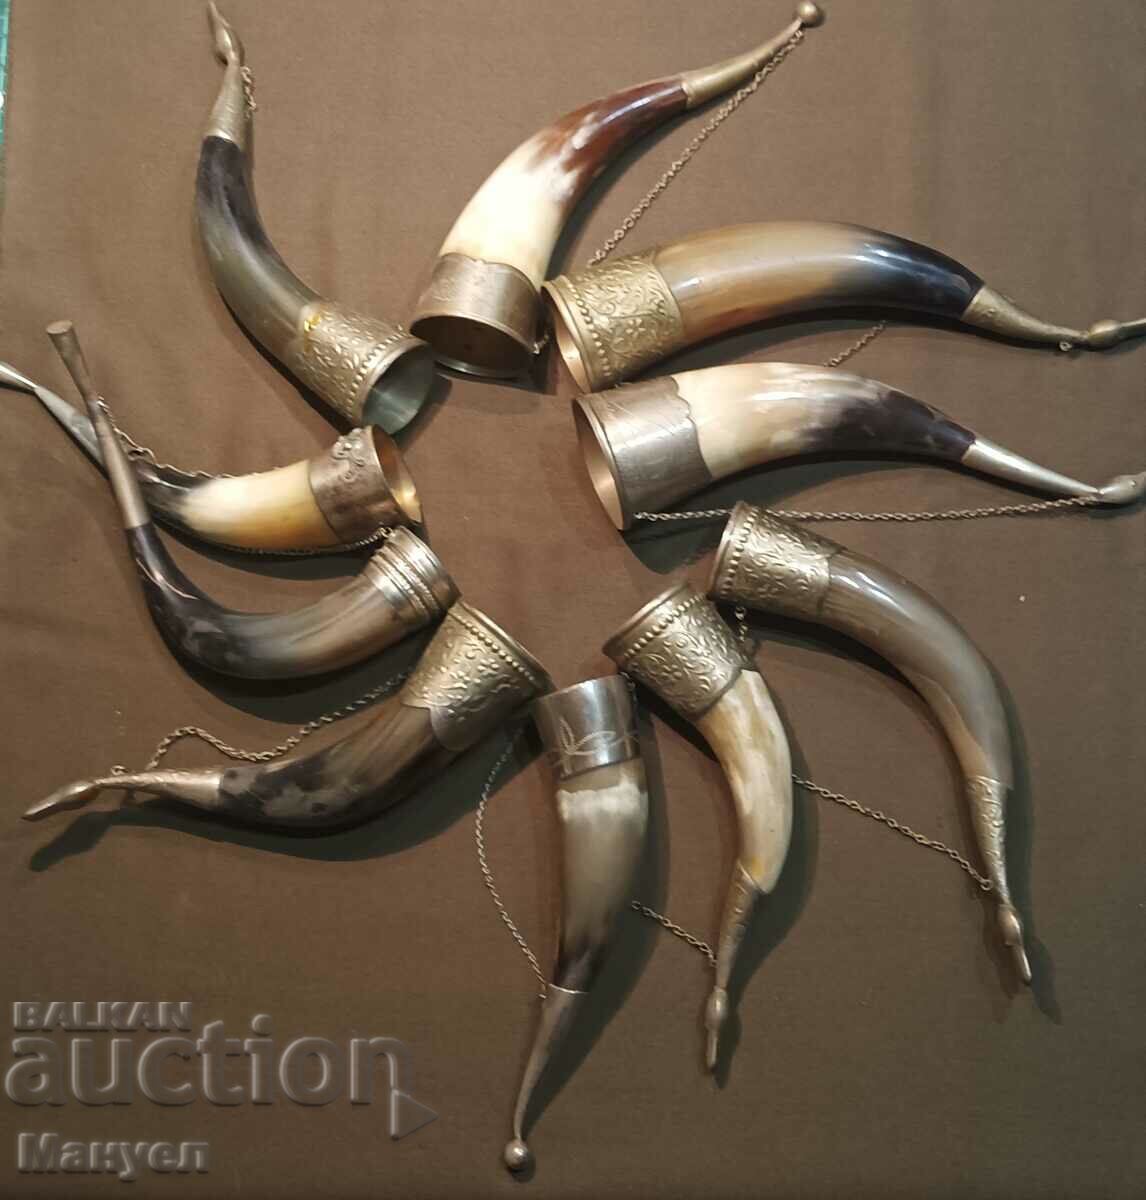 A collection of 10 old Georgian wine drinking horns.